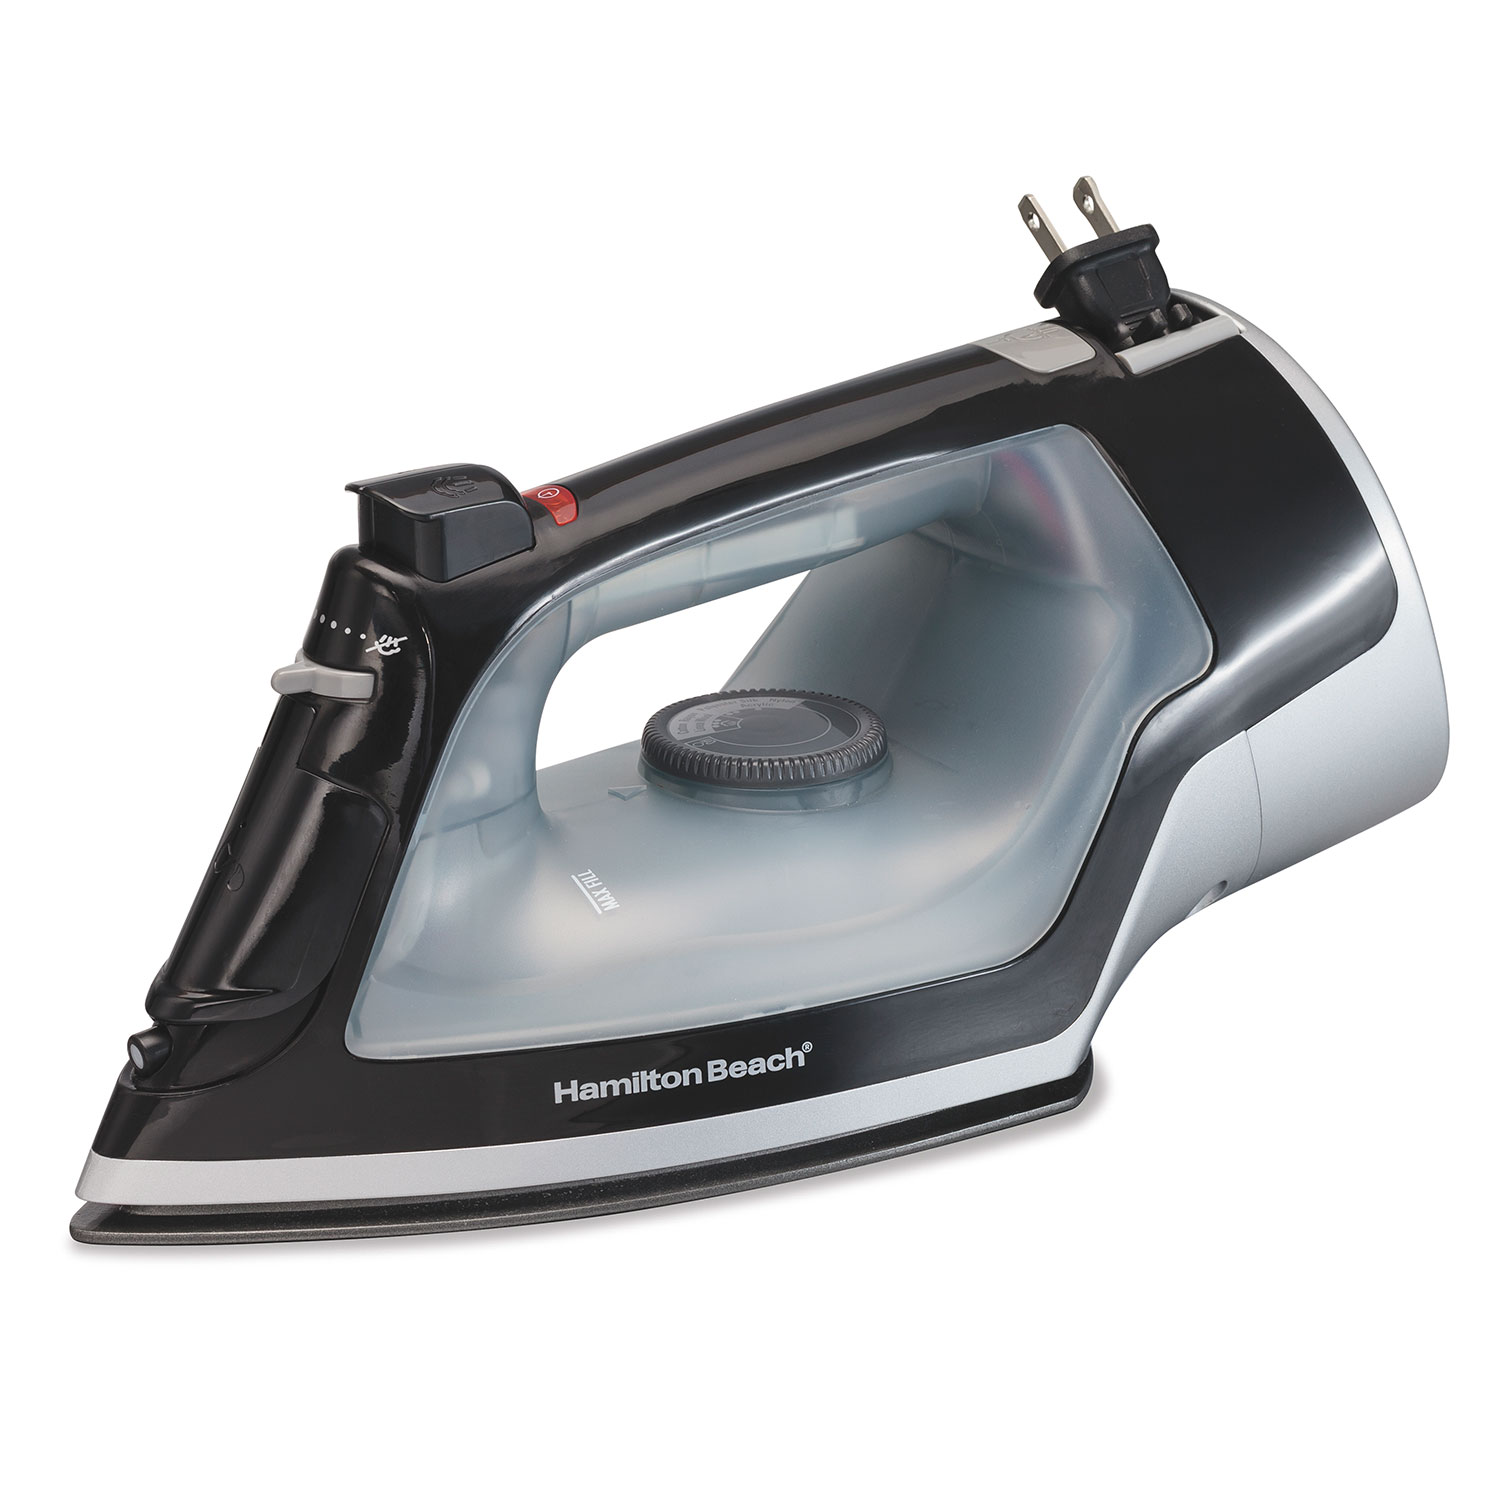 Full-Size Iron with Retractable Cord (14289F)